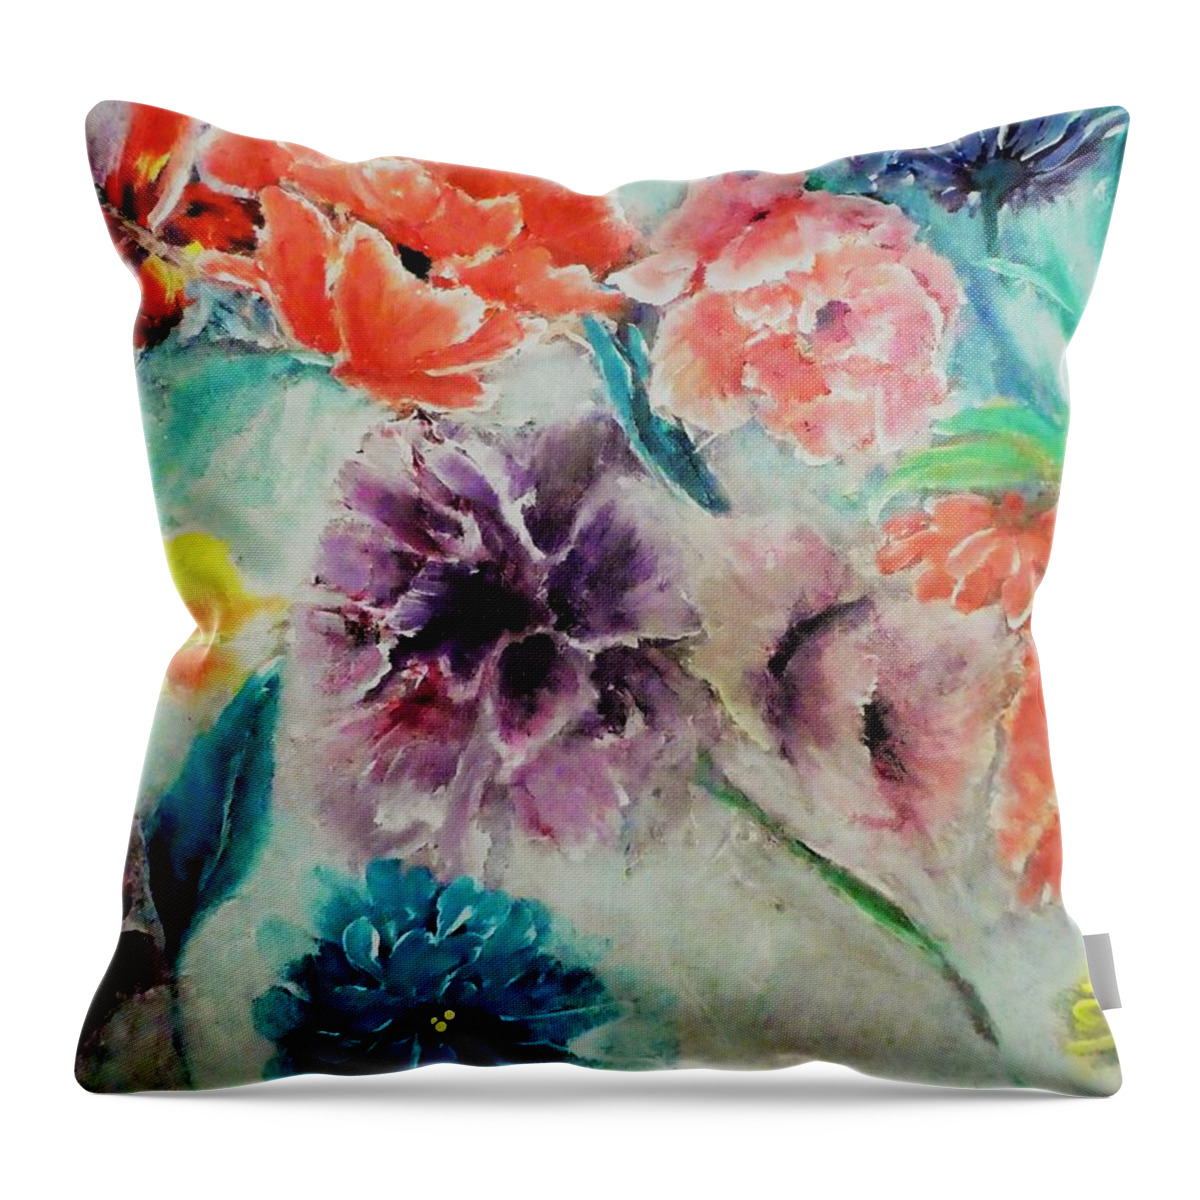 Wrap Throw Pillow featuring the digital art Wrap it Up In Spring by Lisa Kaiser by Lisa Kaiser